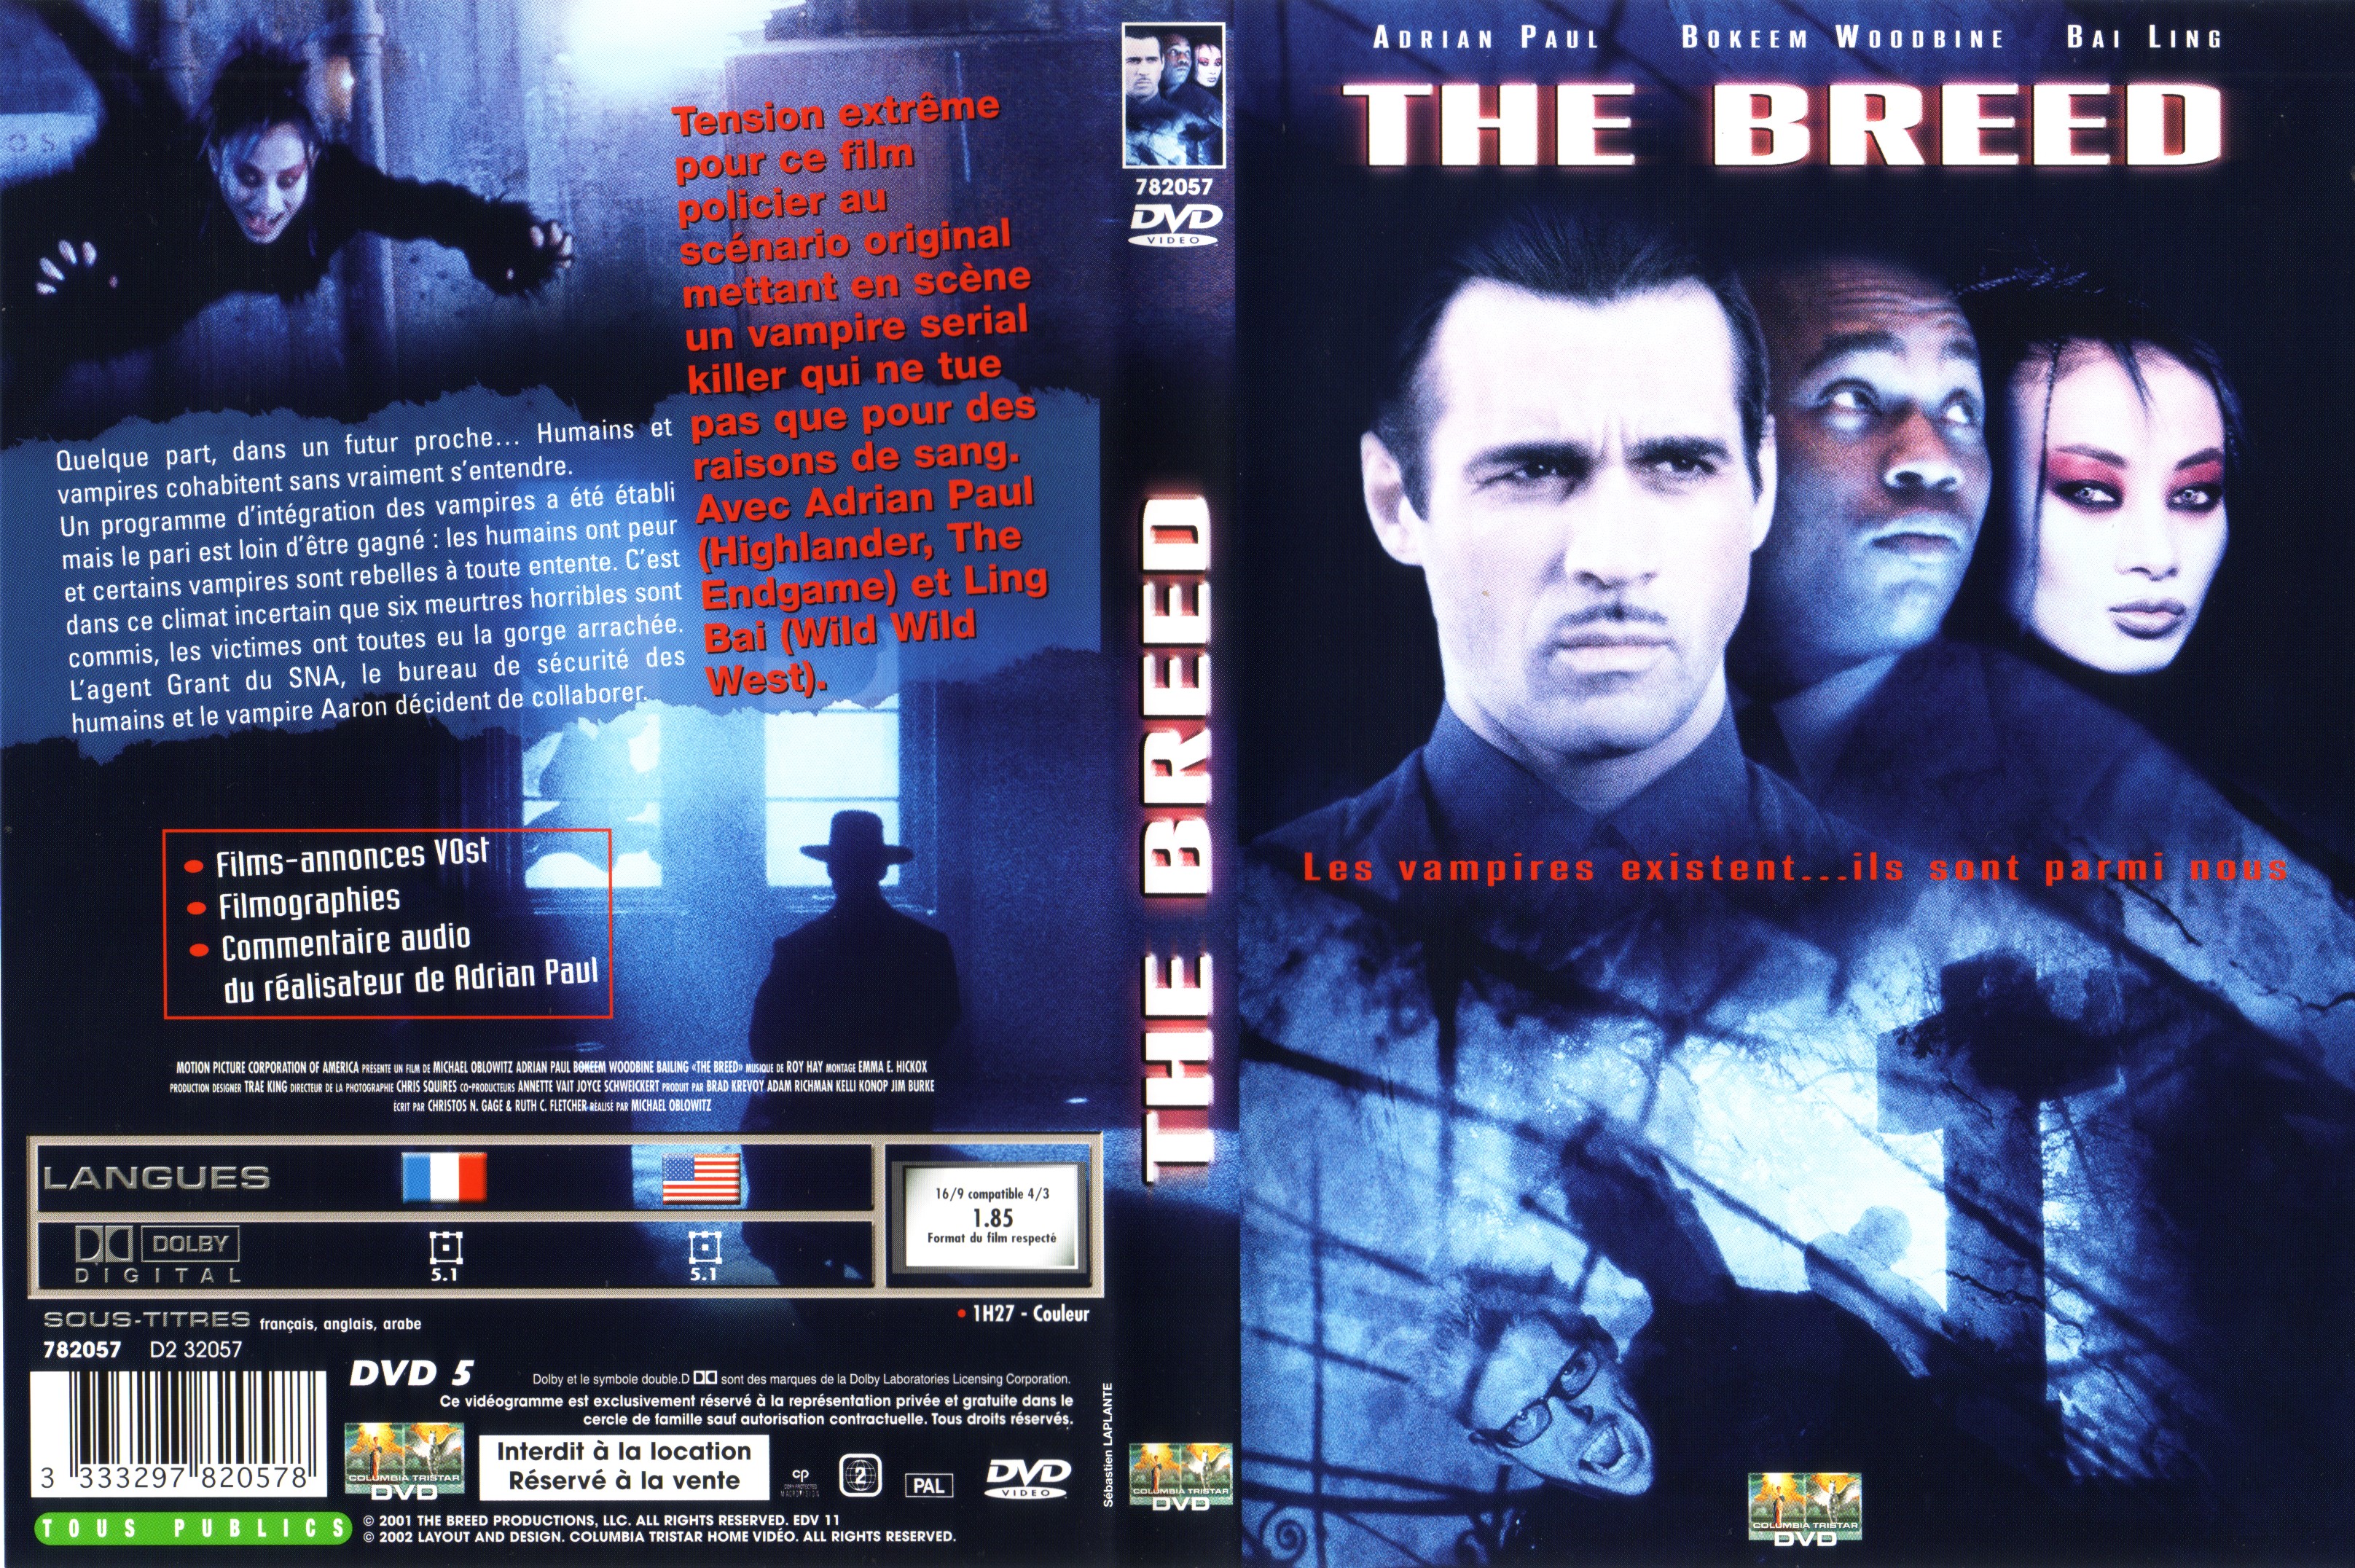 Jaquette DVD The breed